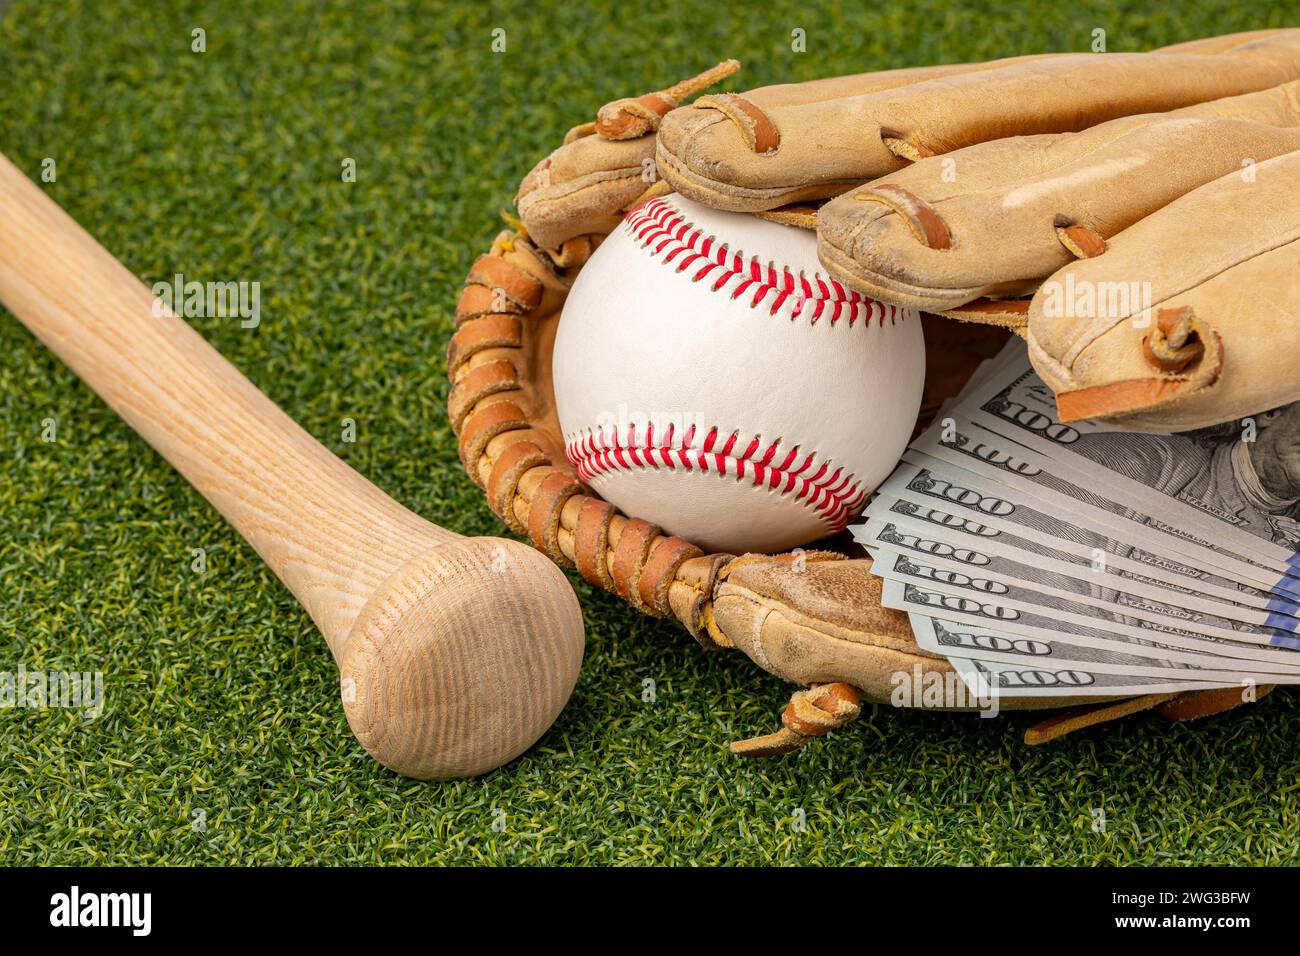 Baseball, glove and wooden bat with cash money. Baseball salary expenses and sports gambling concept. Stock Photo